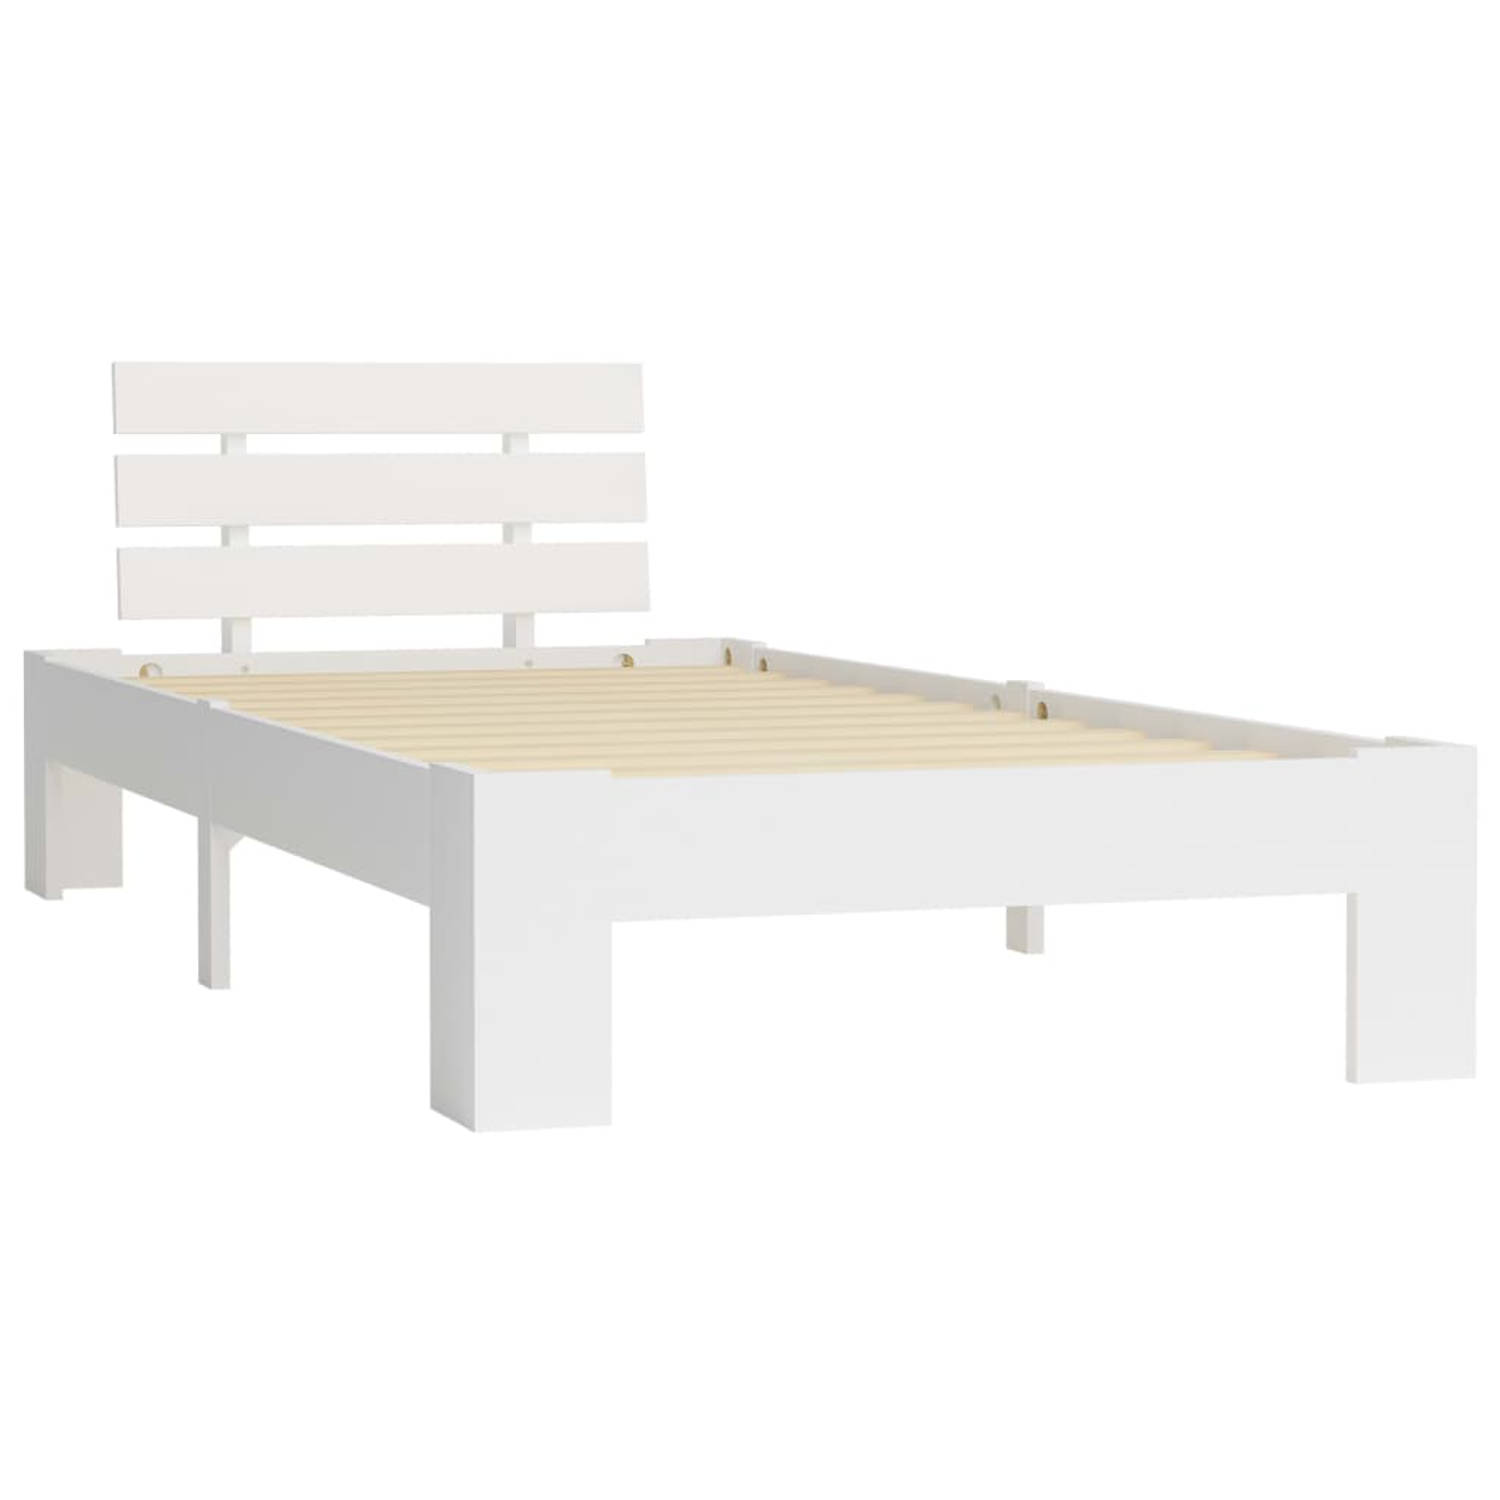 The Living Store Bedframe massief grenenhout wit 100x200 cm - Bed